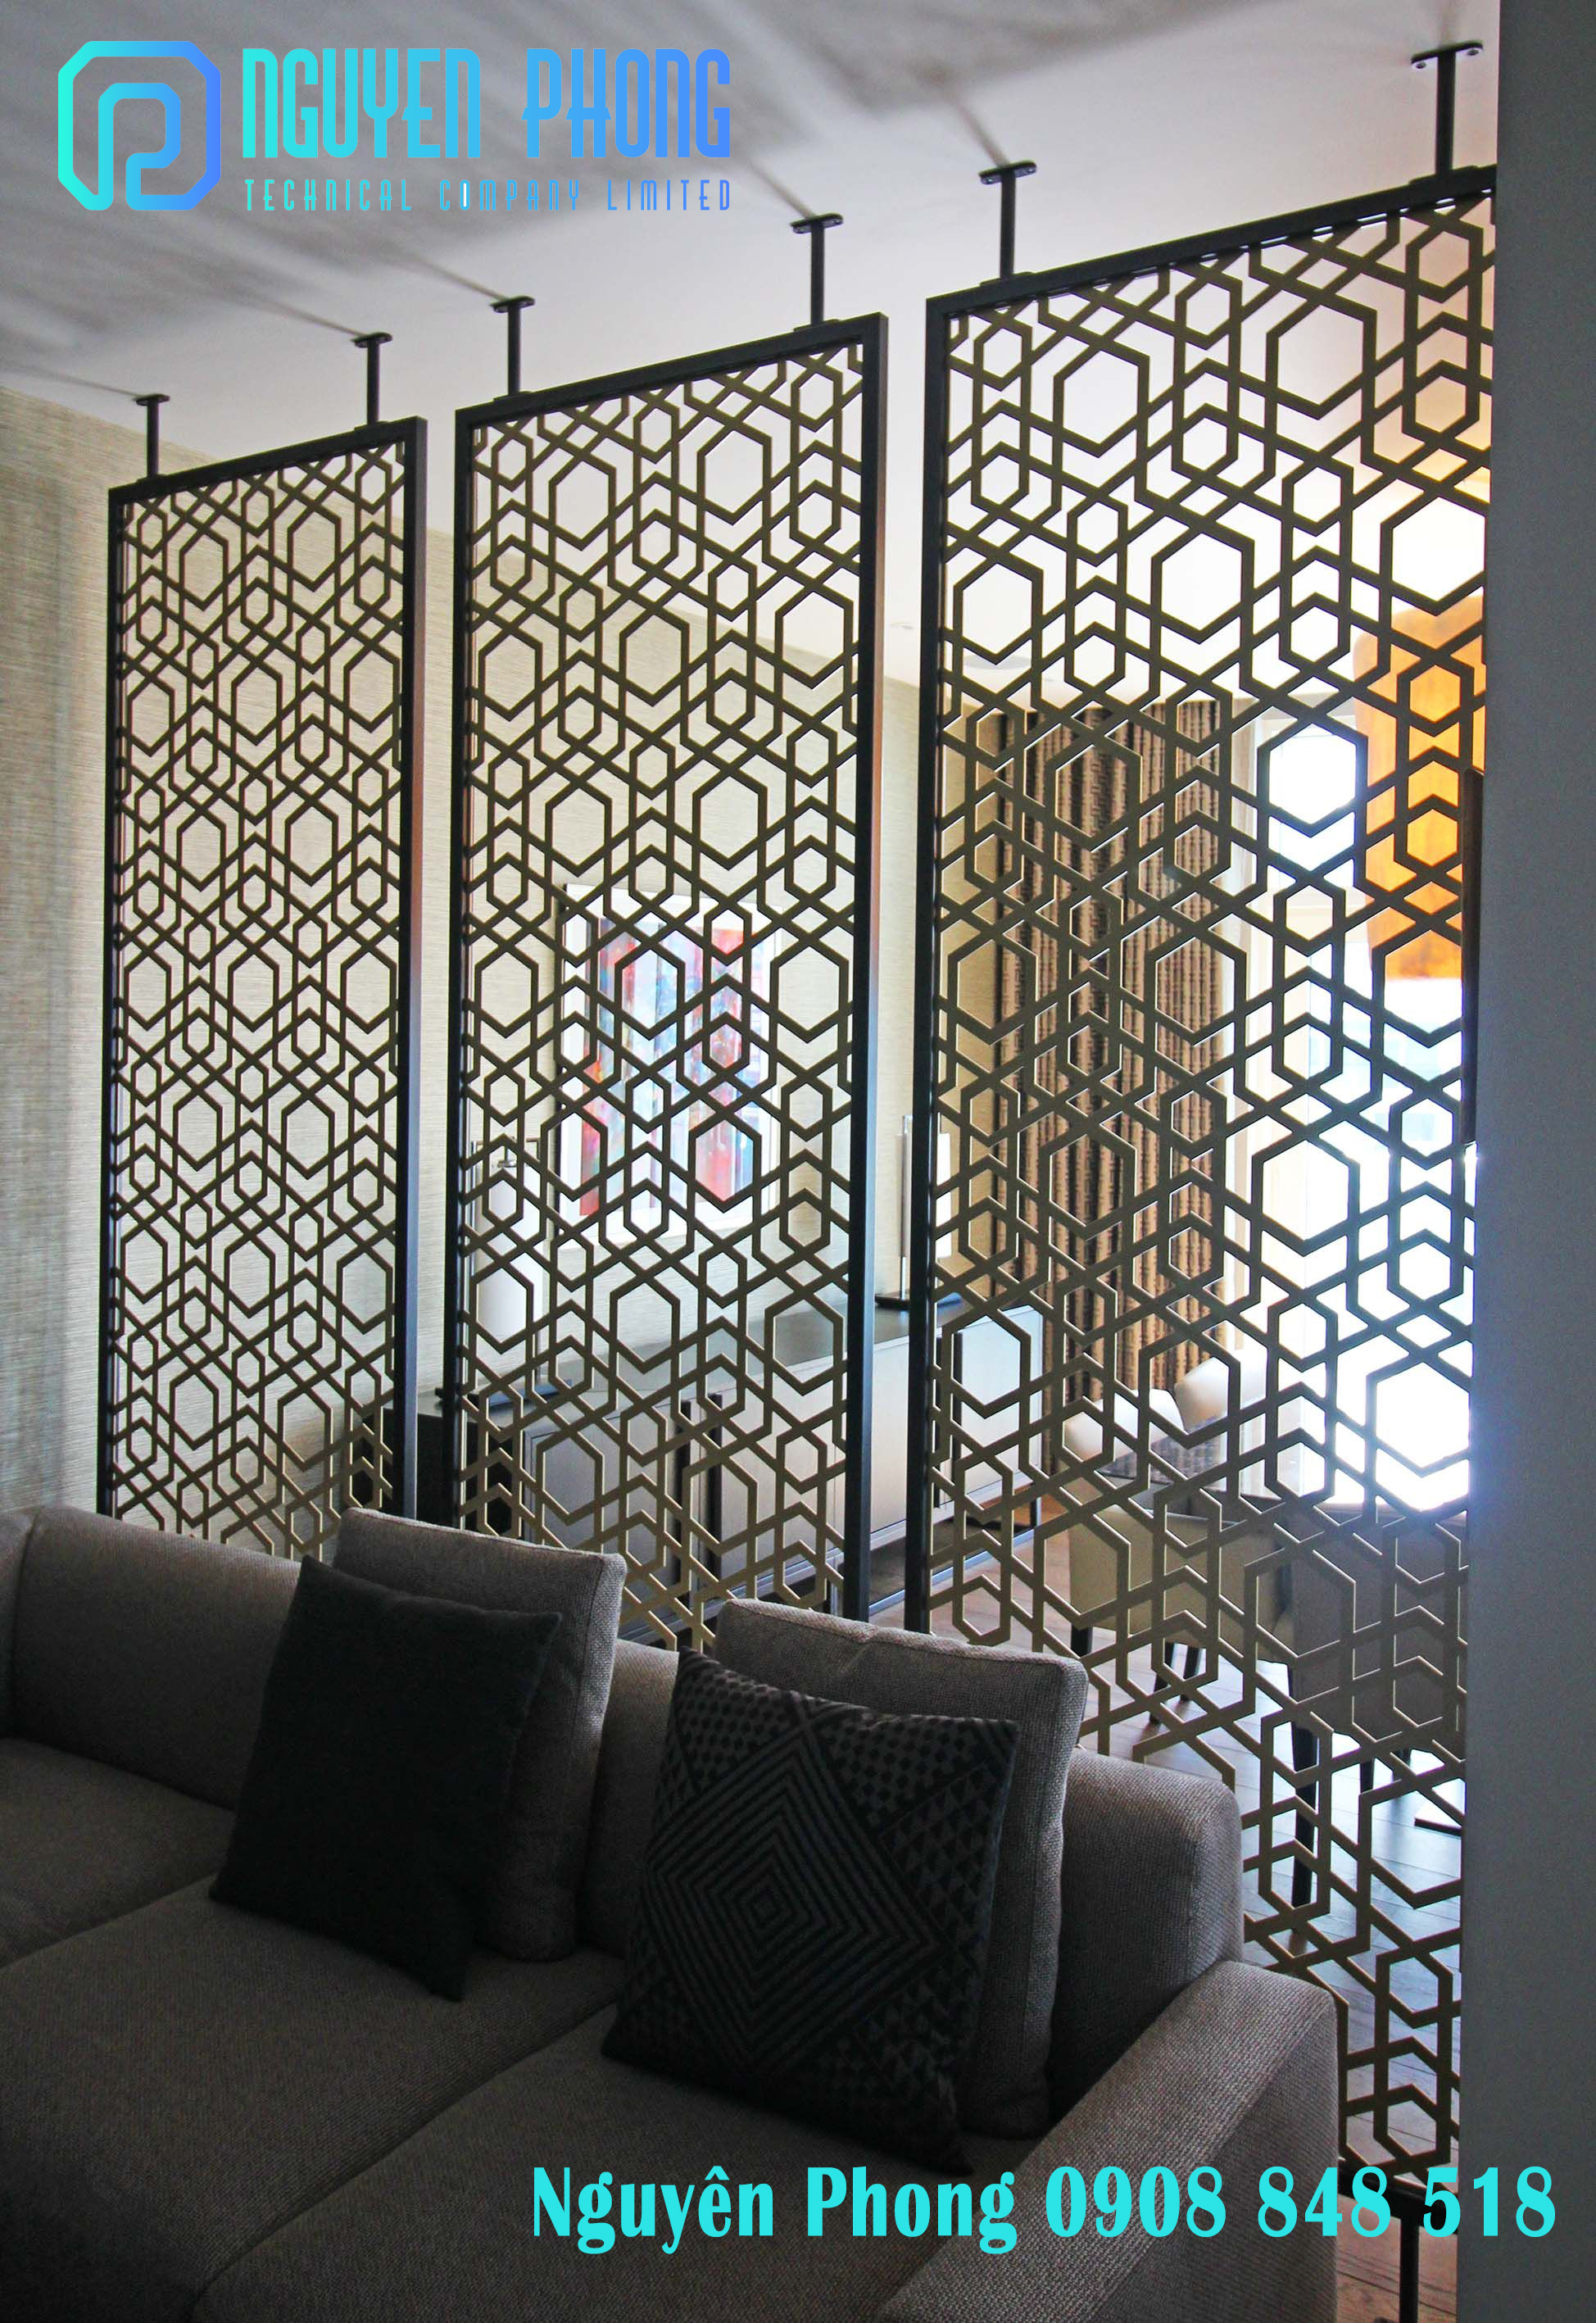 Laser Cut Framed Screens - Miles and Lincoln - Laser Cut Screens.jpg